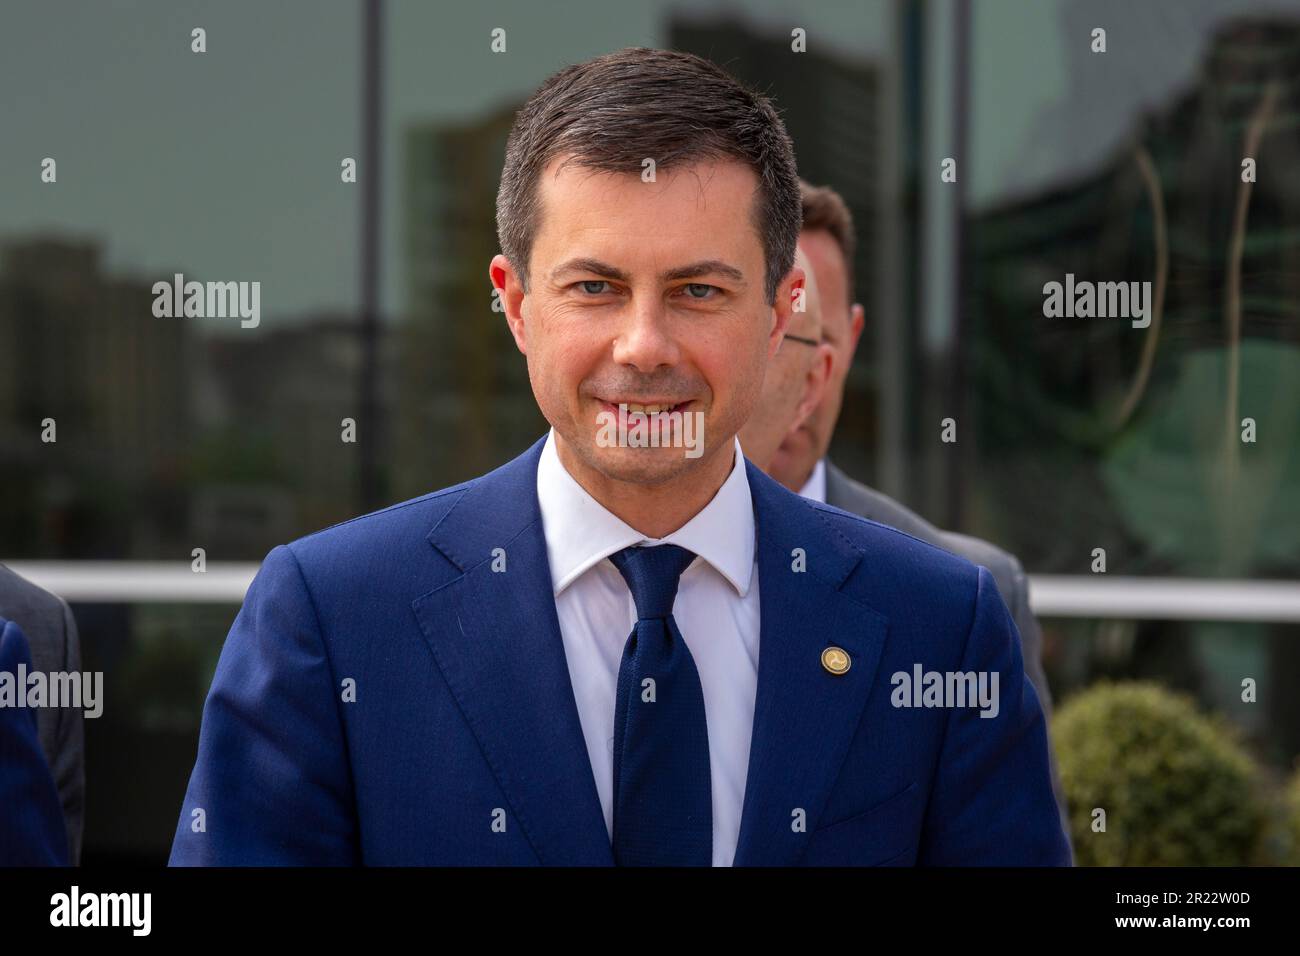 Detroit, Michigan, USA. 16th May, 2023. The United States and Canada announced plans for a binational electric vehicle corridor, with DC fast charging stations every 50 miles from Kalamazoo, Michigan to Quebec City, Quebec. U.S. Transportation Secretary Pete Buttigieg arrives at the event. Credit: Jim West/Alamy Live News Stock Photo